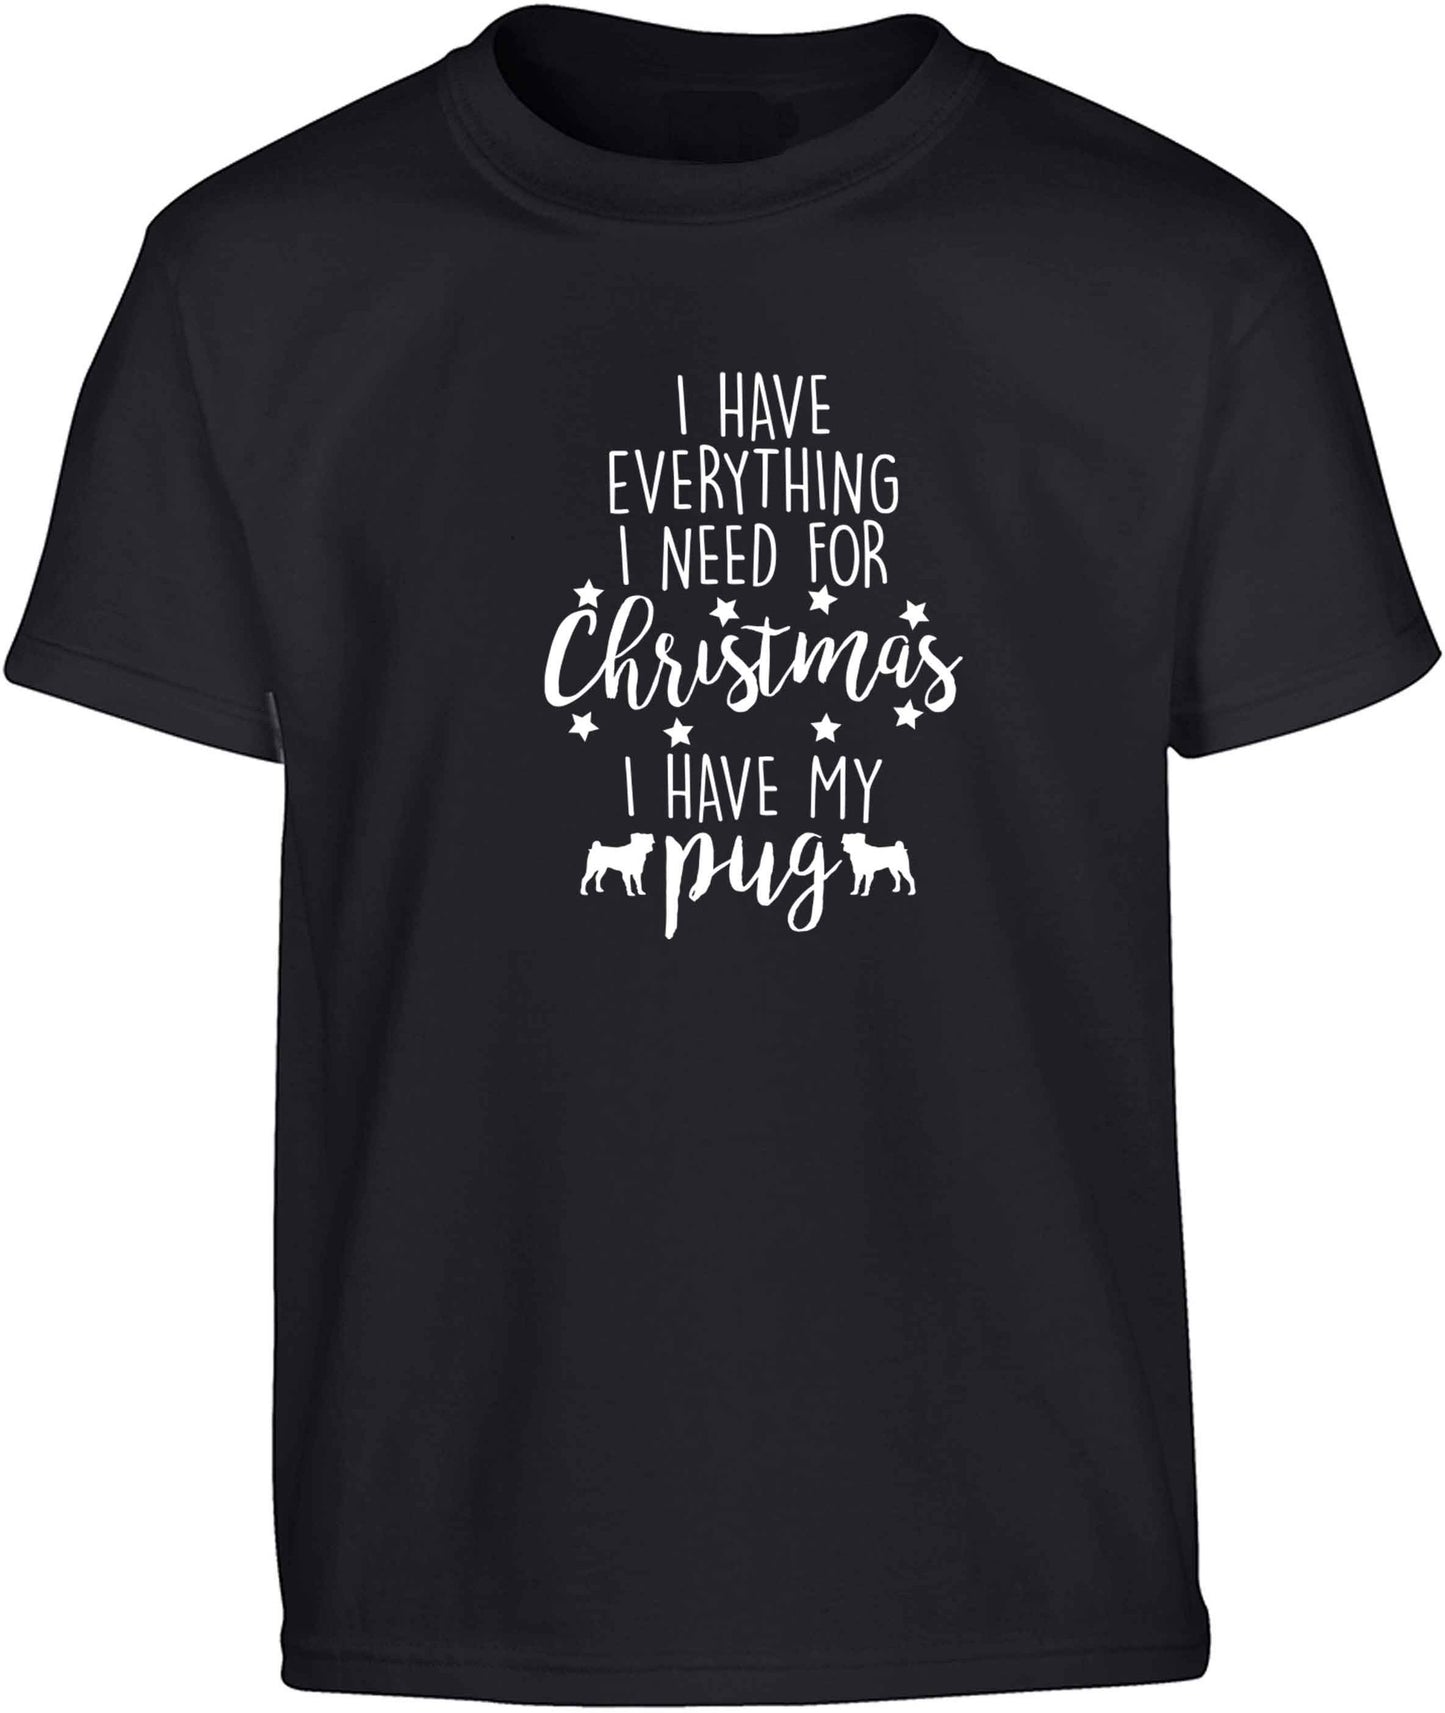 I have everything I need for Christmas I have my pug Children's black Tshirt 12-13 Years